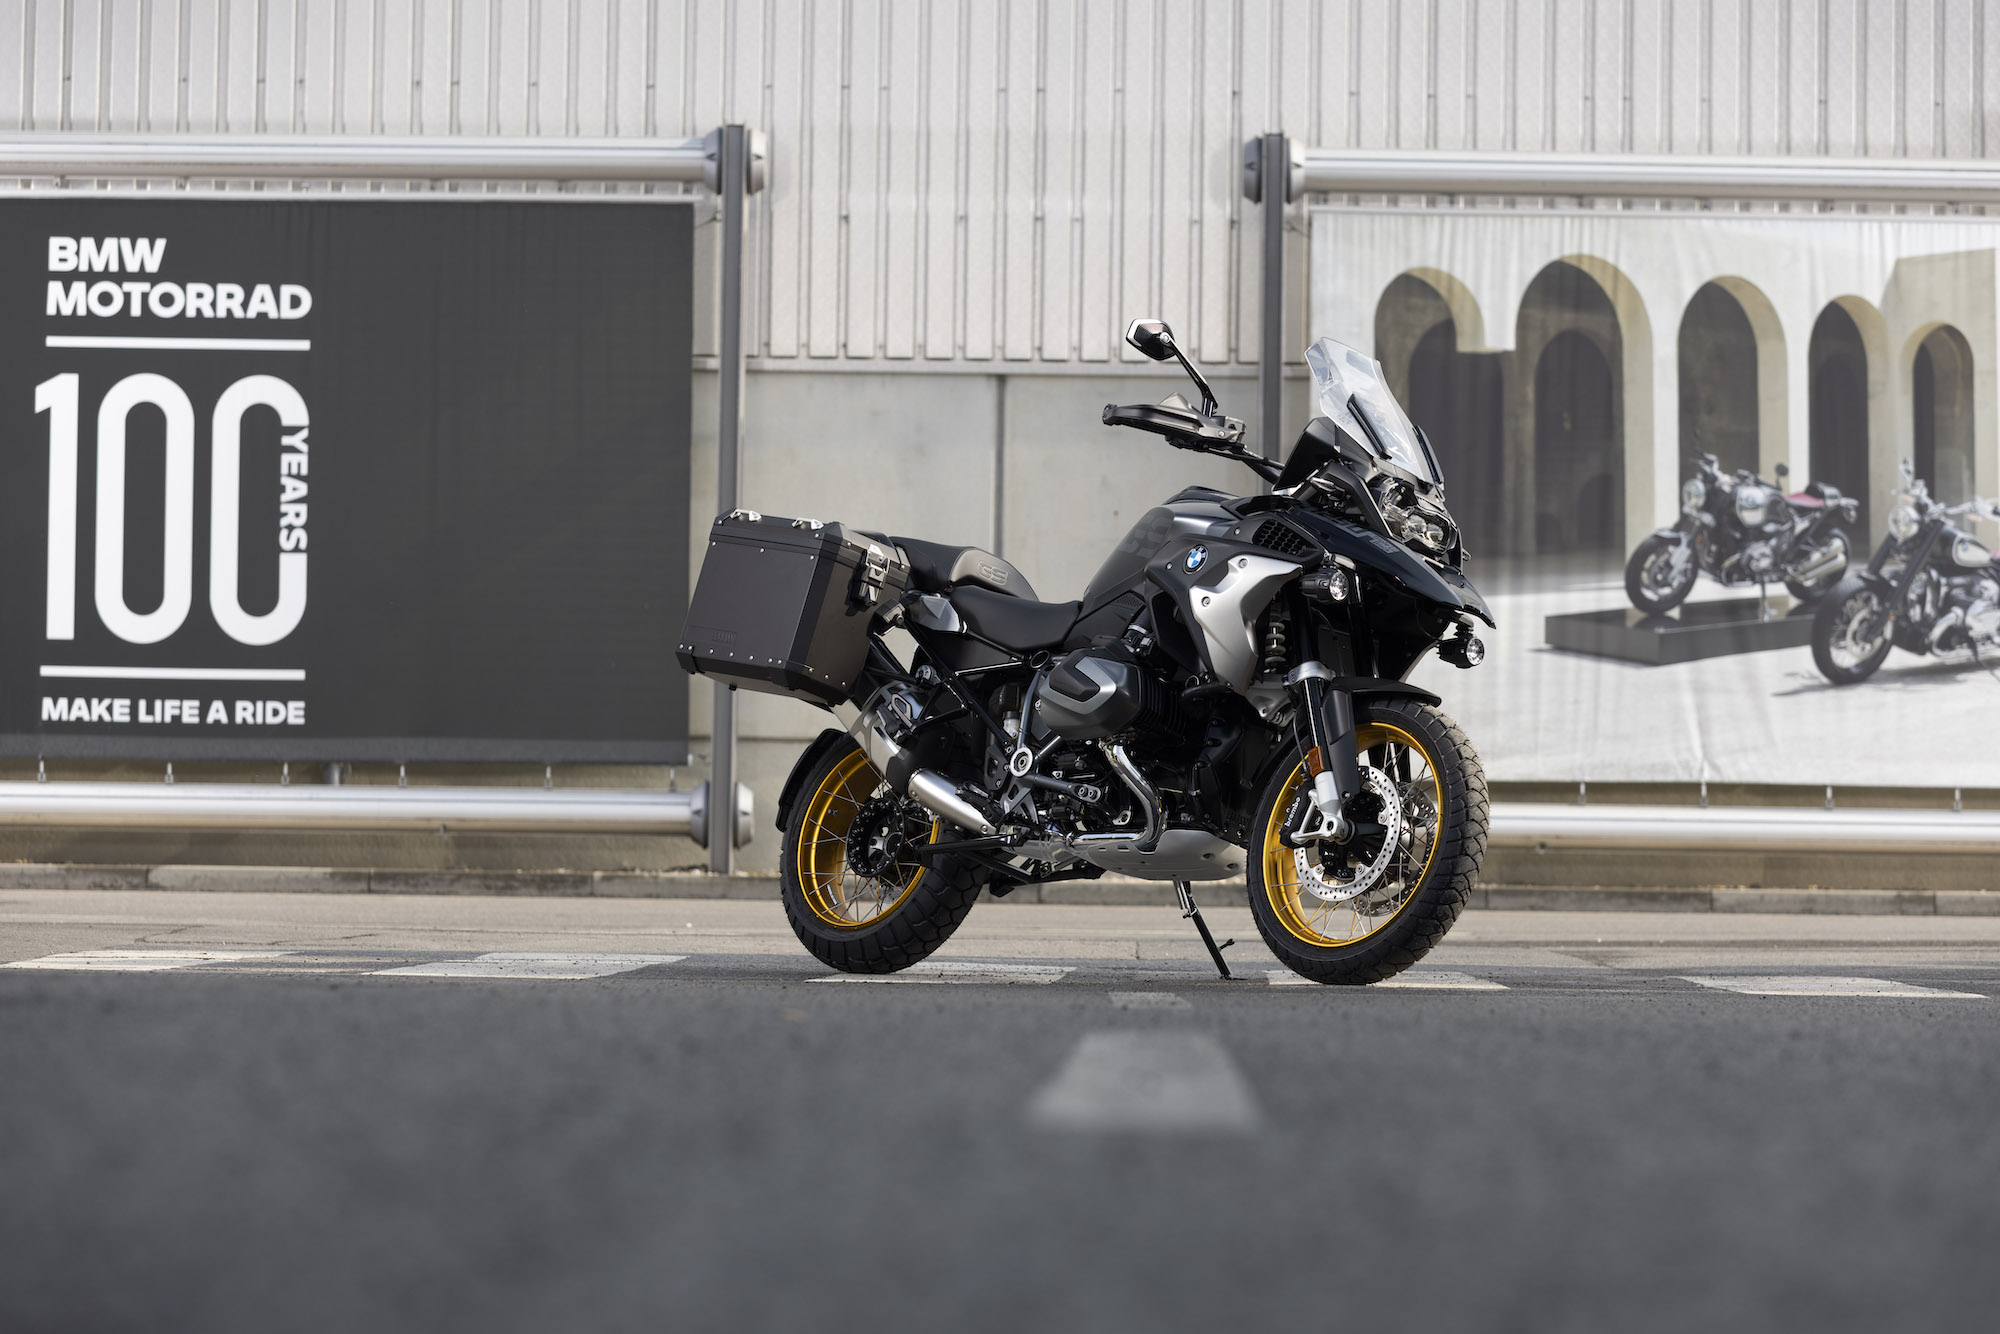 A view of BMW's millionth motorcycle: An R 1250 GS. Media sourced from BMW Motorrad.